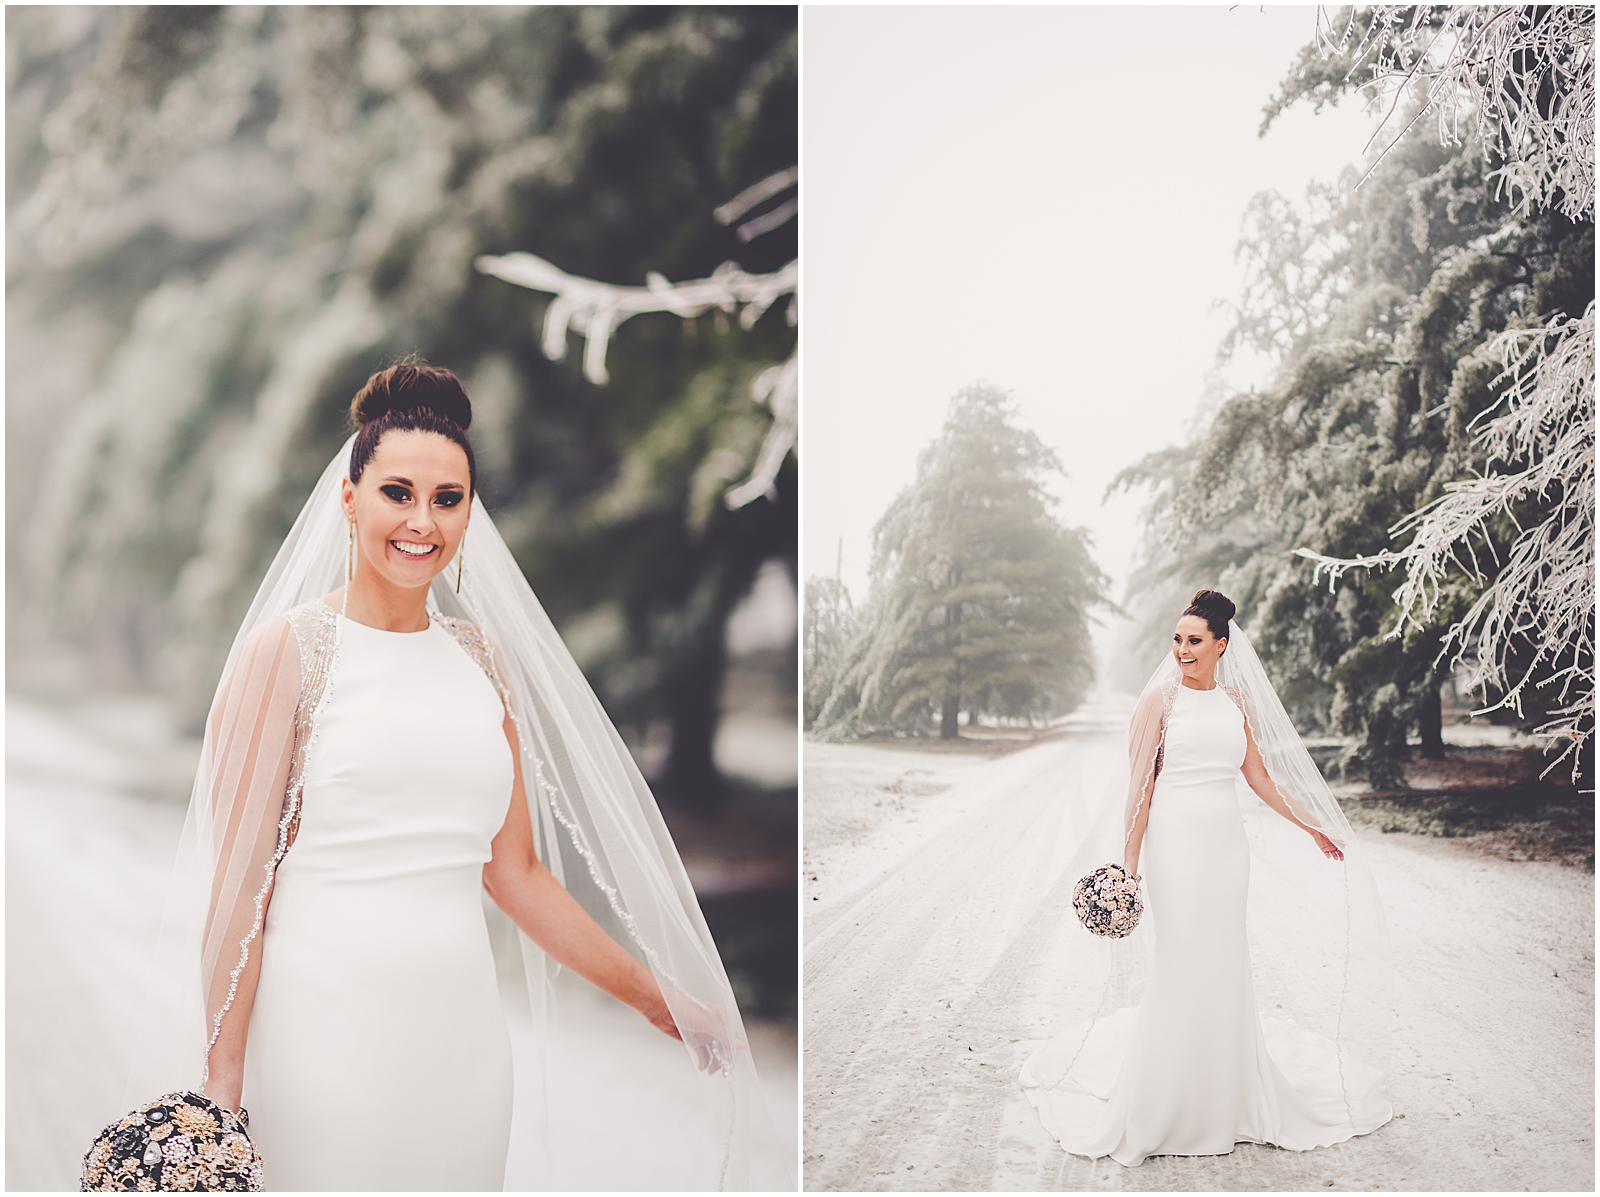 Holly and Kolton's snowy winter wedding day at The Longbranch in L'erable with Chicagoland wedding photographer Kara Evans Photographer.